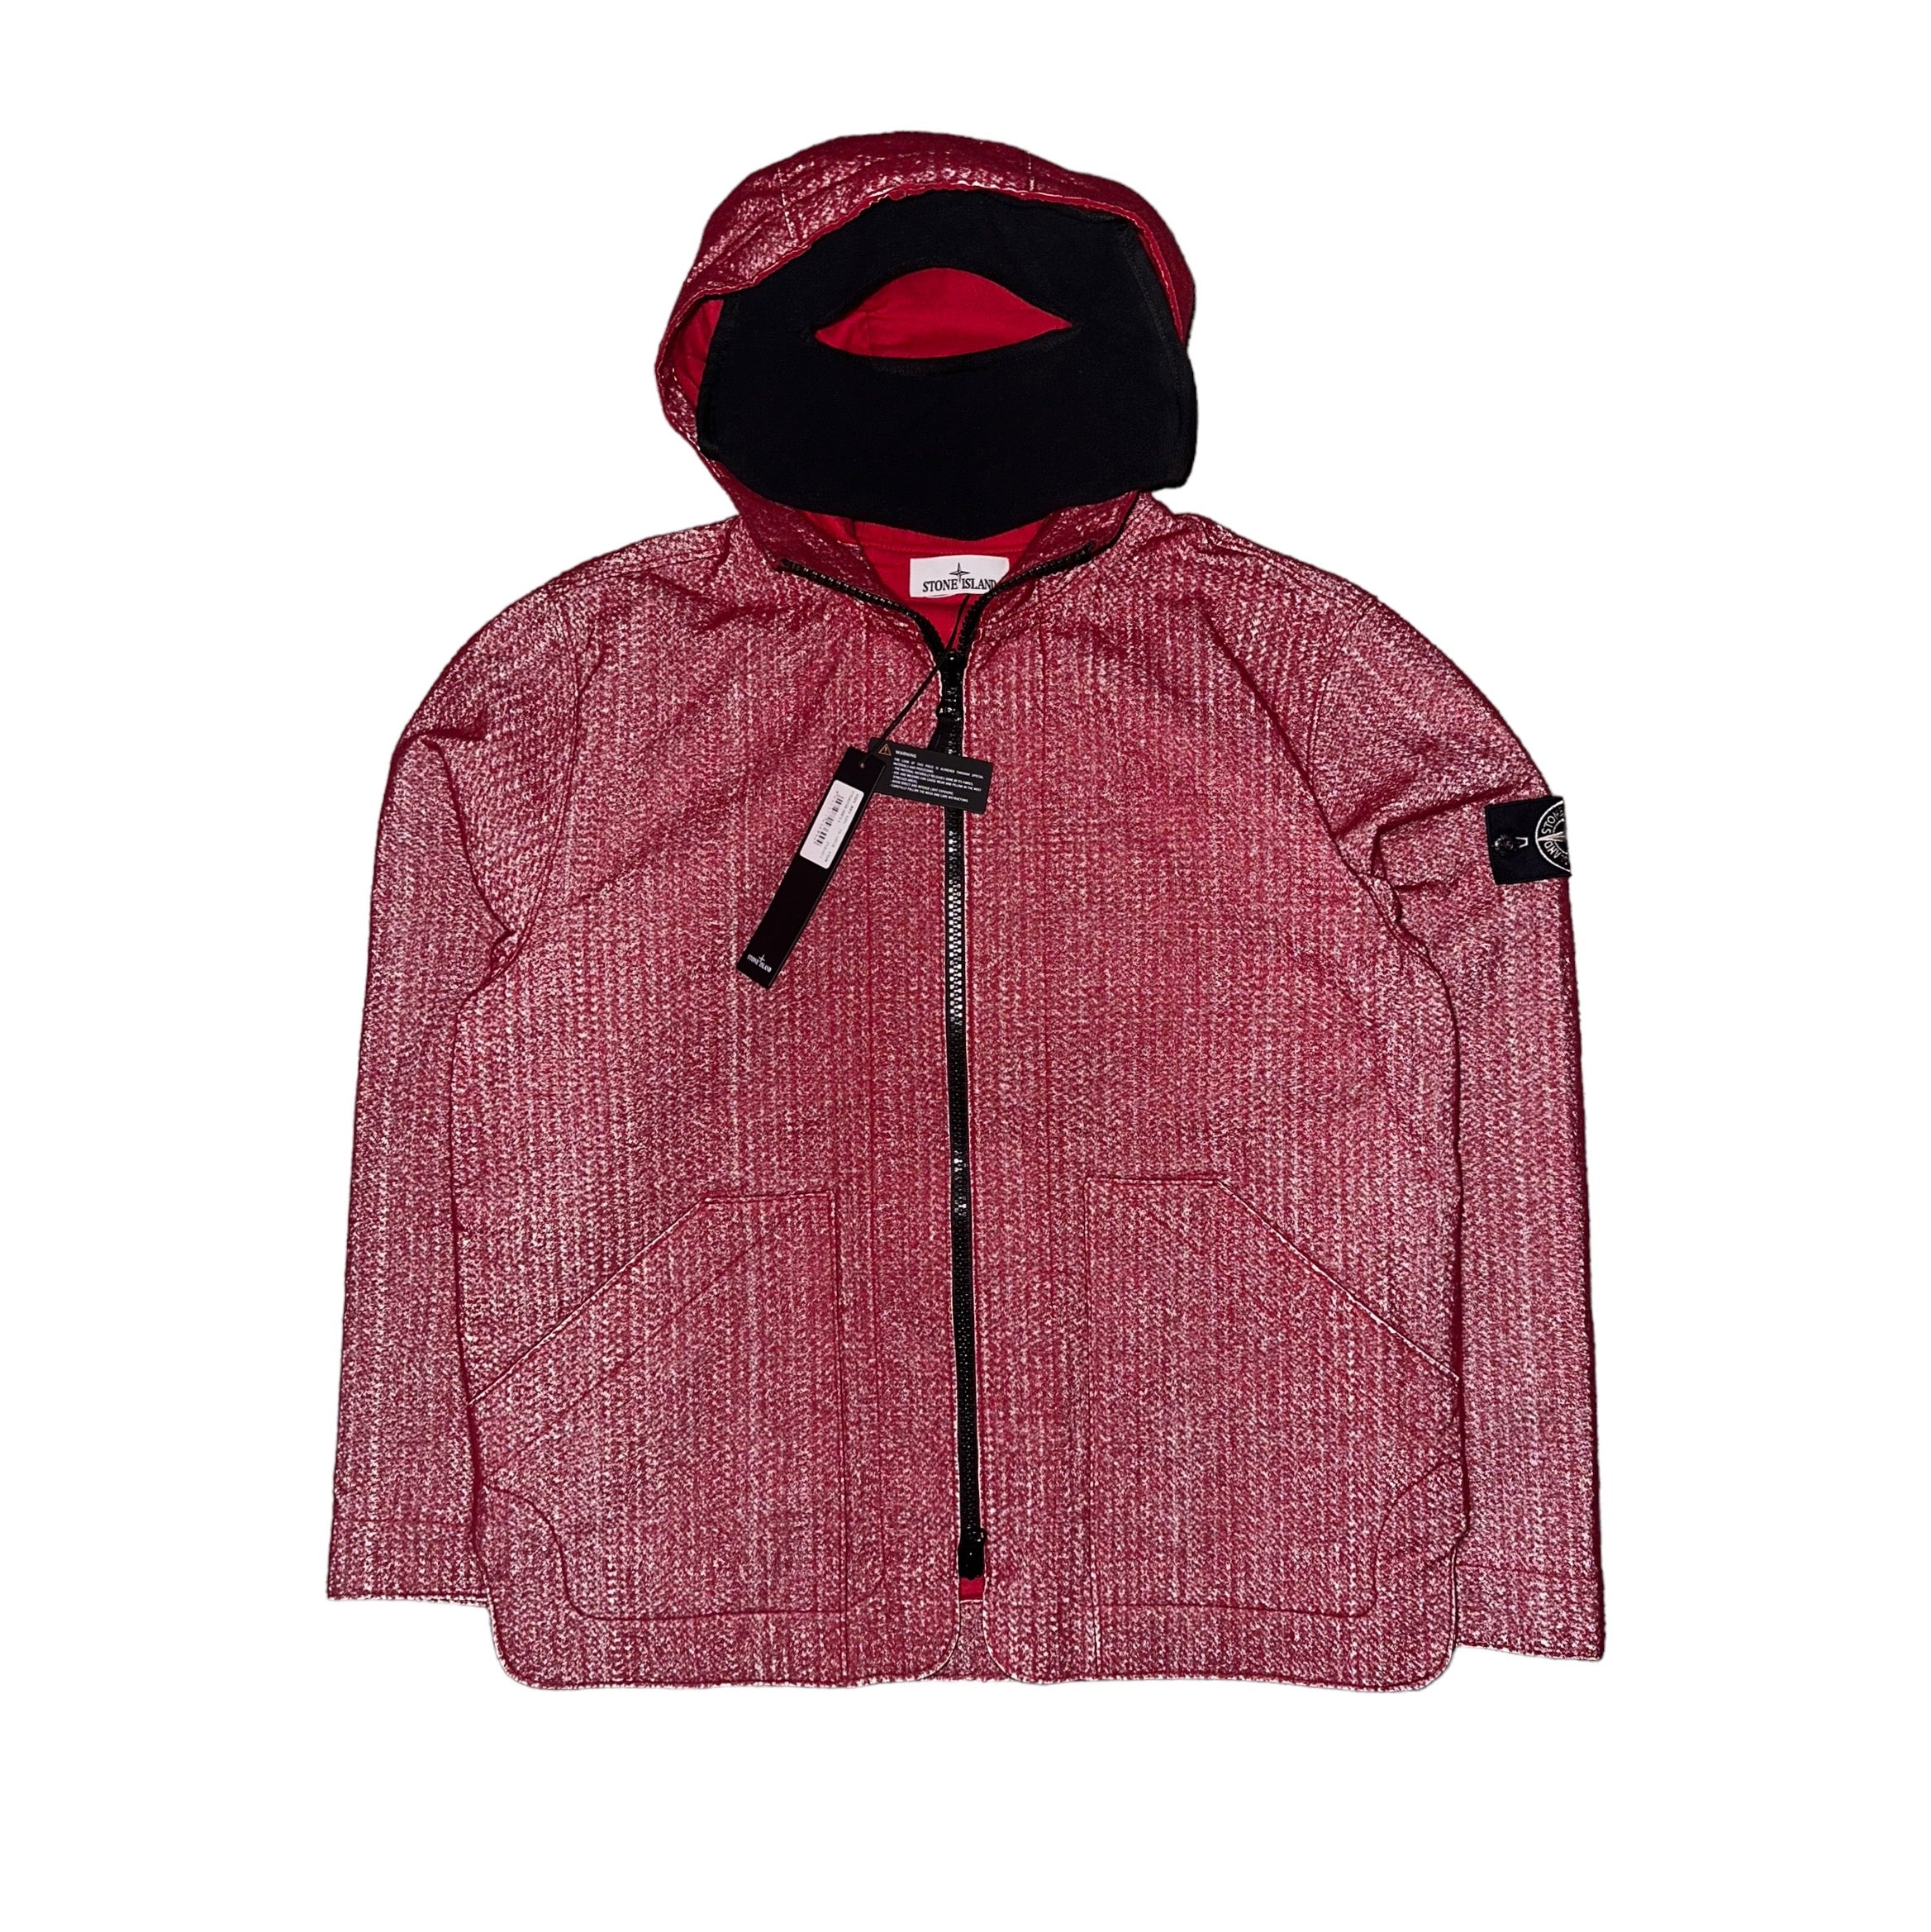 Stone Island Needle Punched Reflective Jacket with Special Process Badge